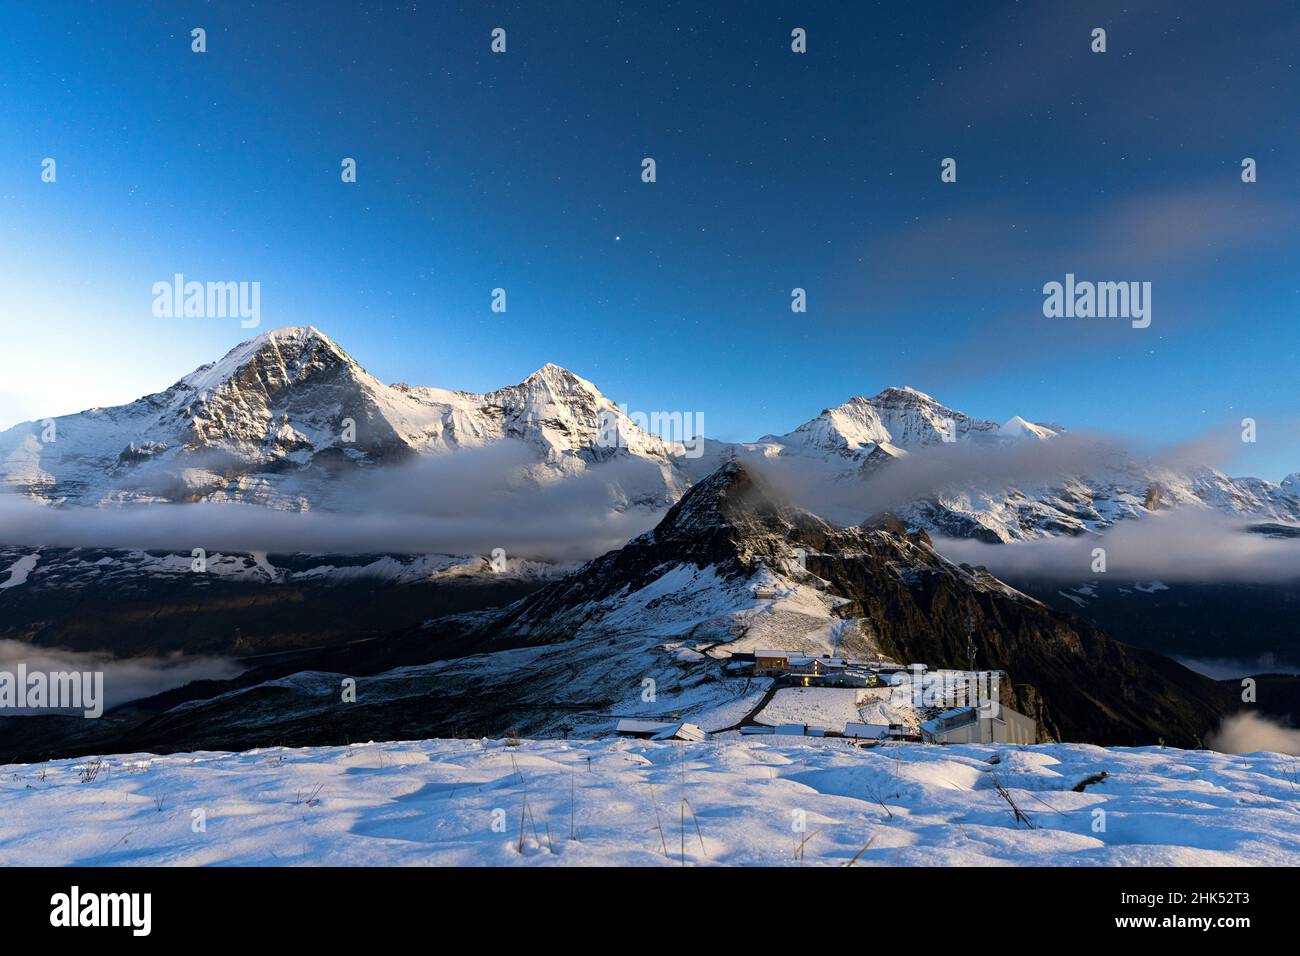 Night view of Eiger, Monch and Jungfrau mountains covered with snow from Mannlichen, Bern Canton, Swiss Alps, Switzerland, Europe Stock Photo